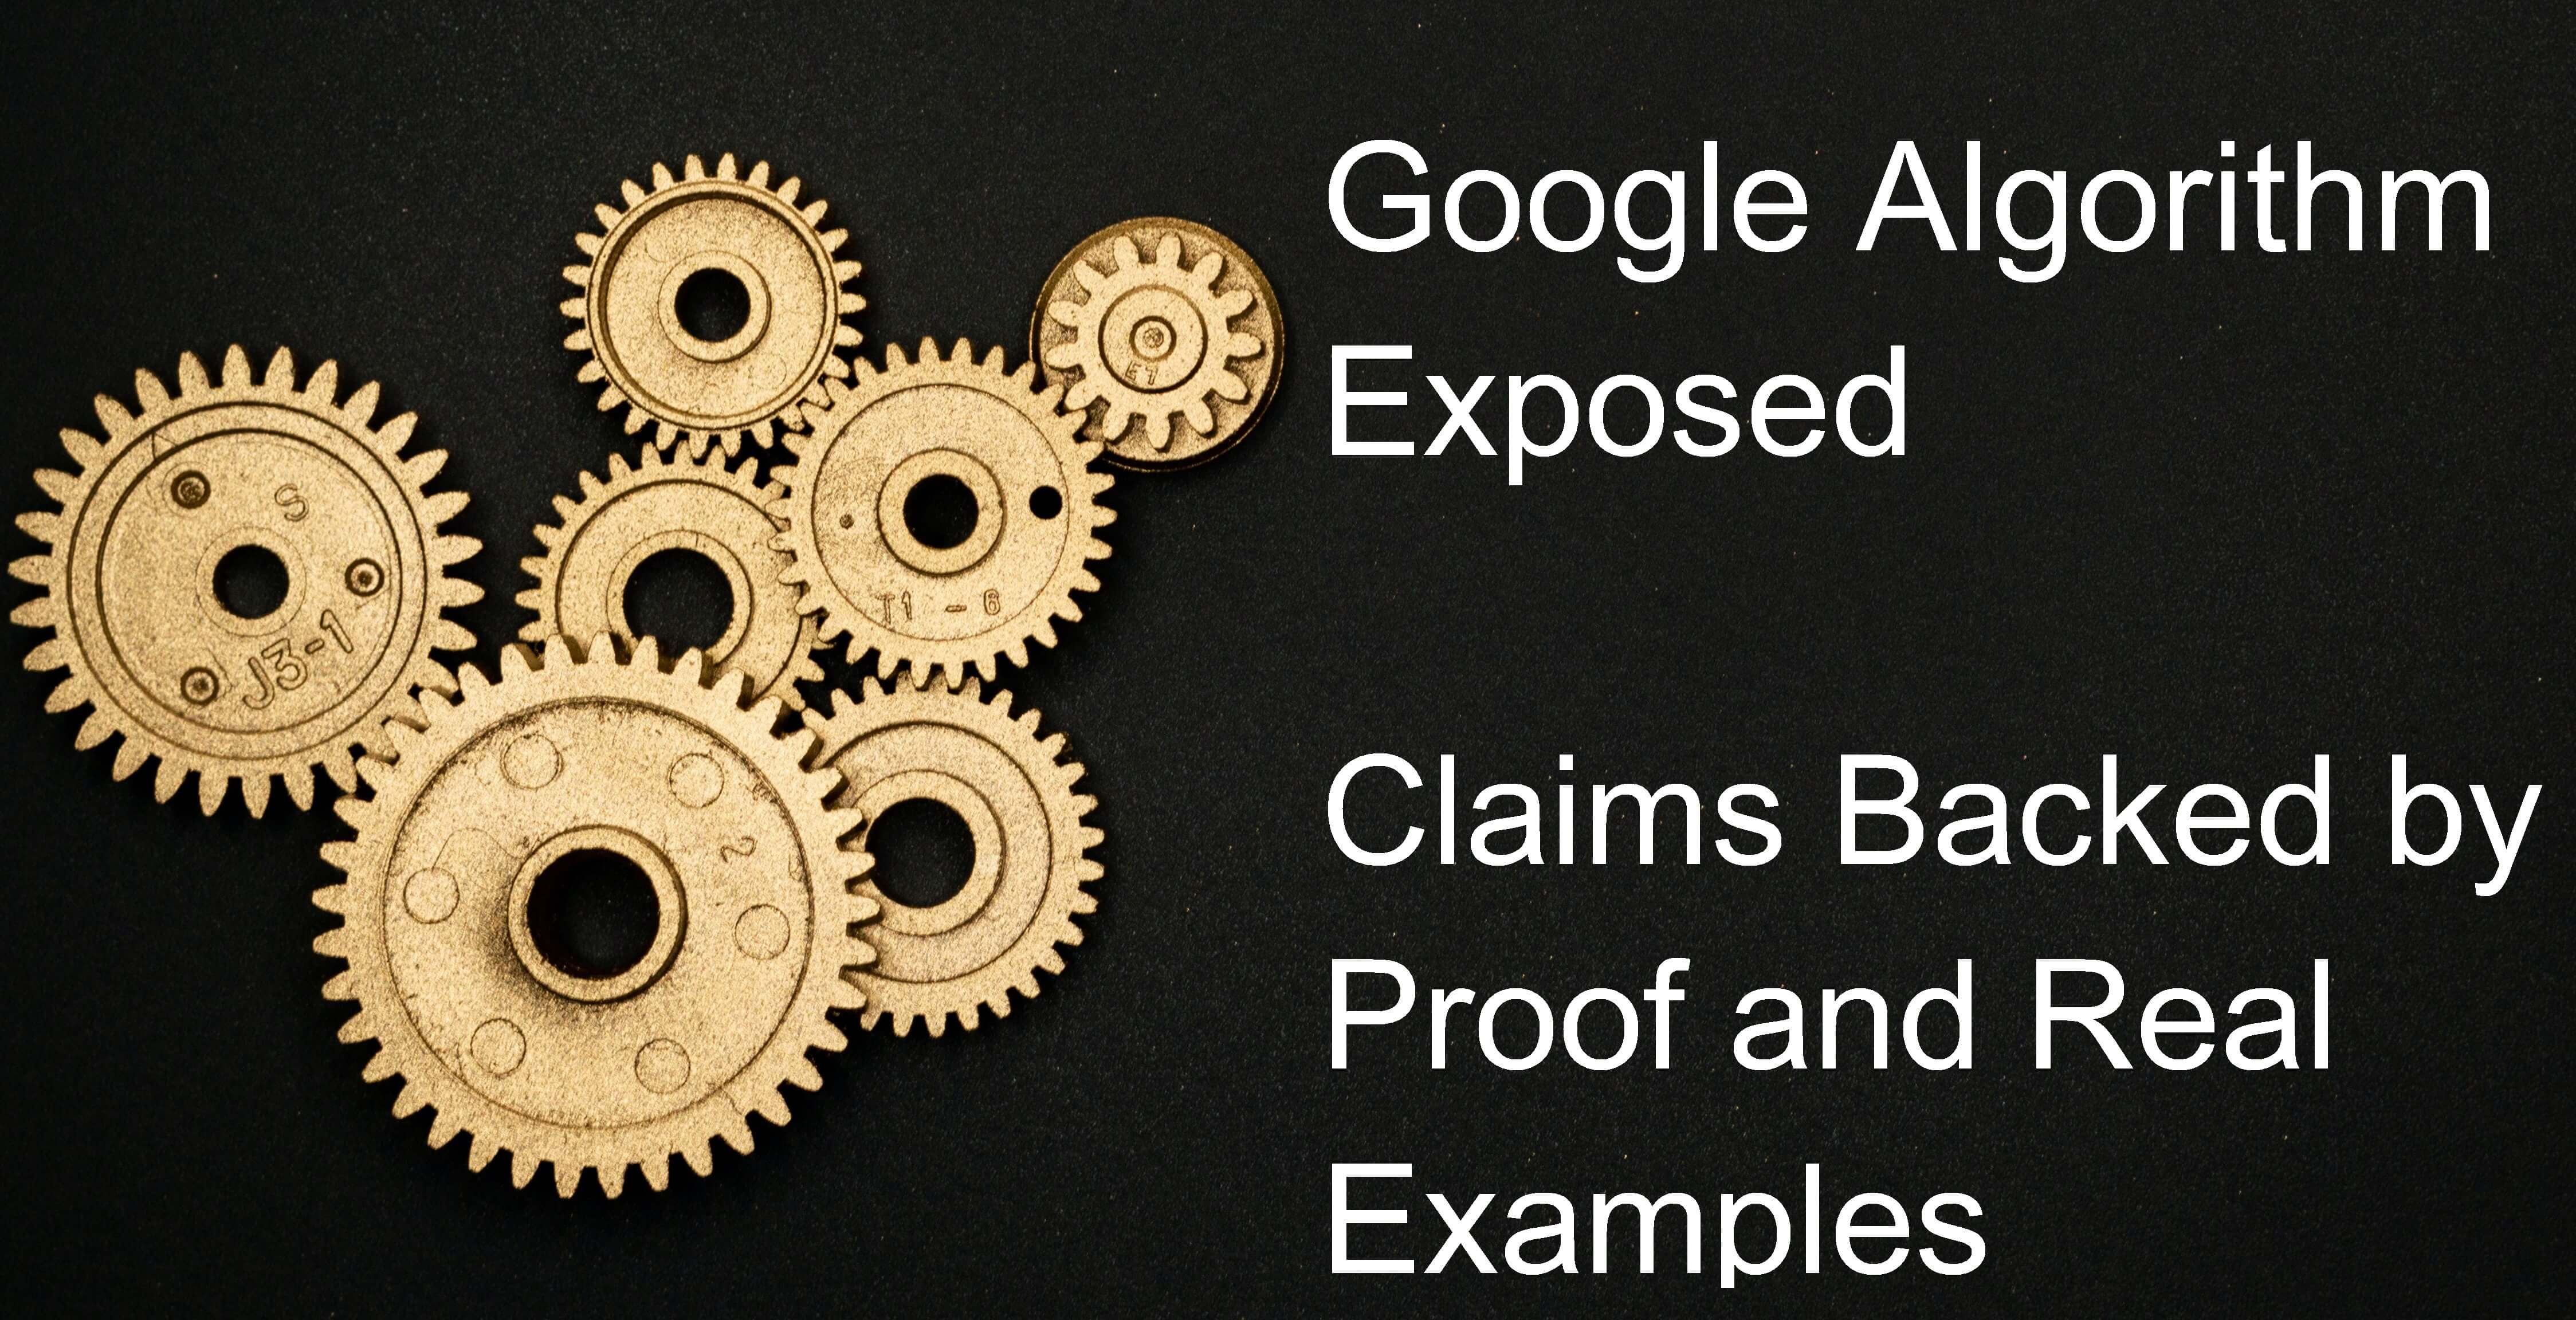 Google Algorithm Exposed - Reverse engineering the Google algorithm and SEO with all claims backed by real examples - A Case Study